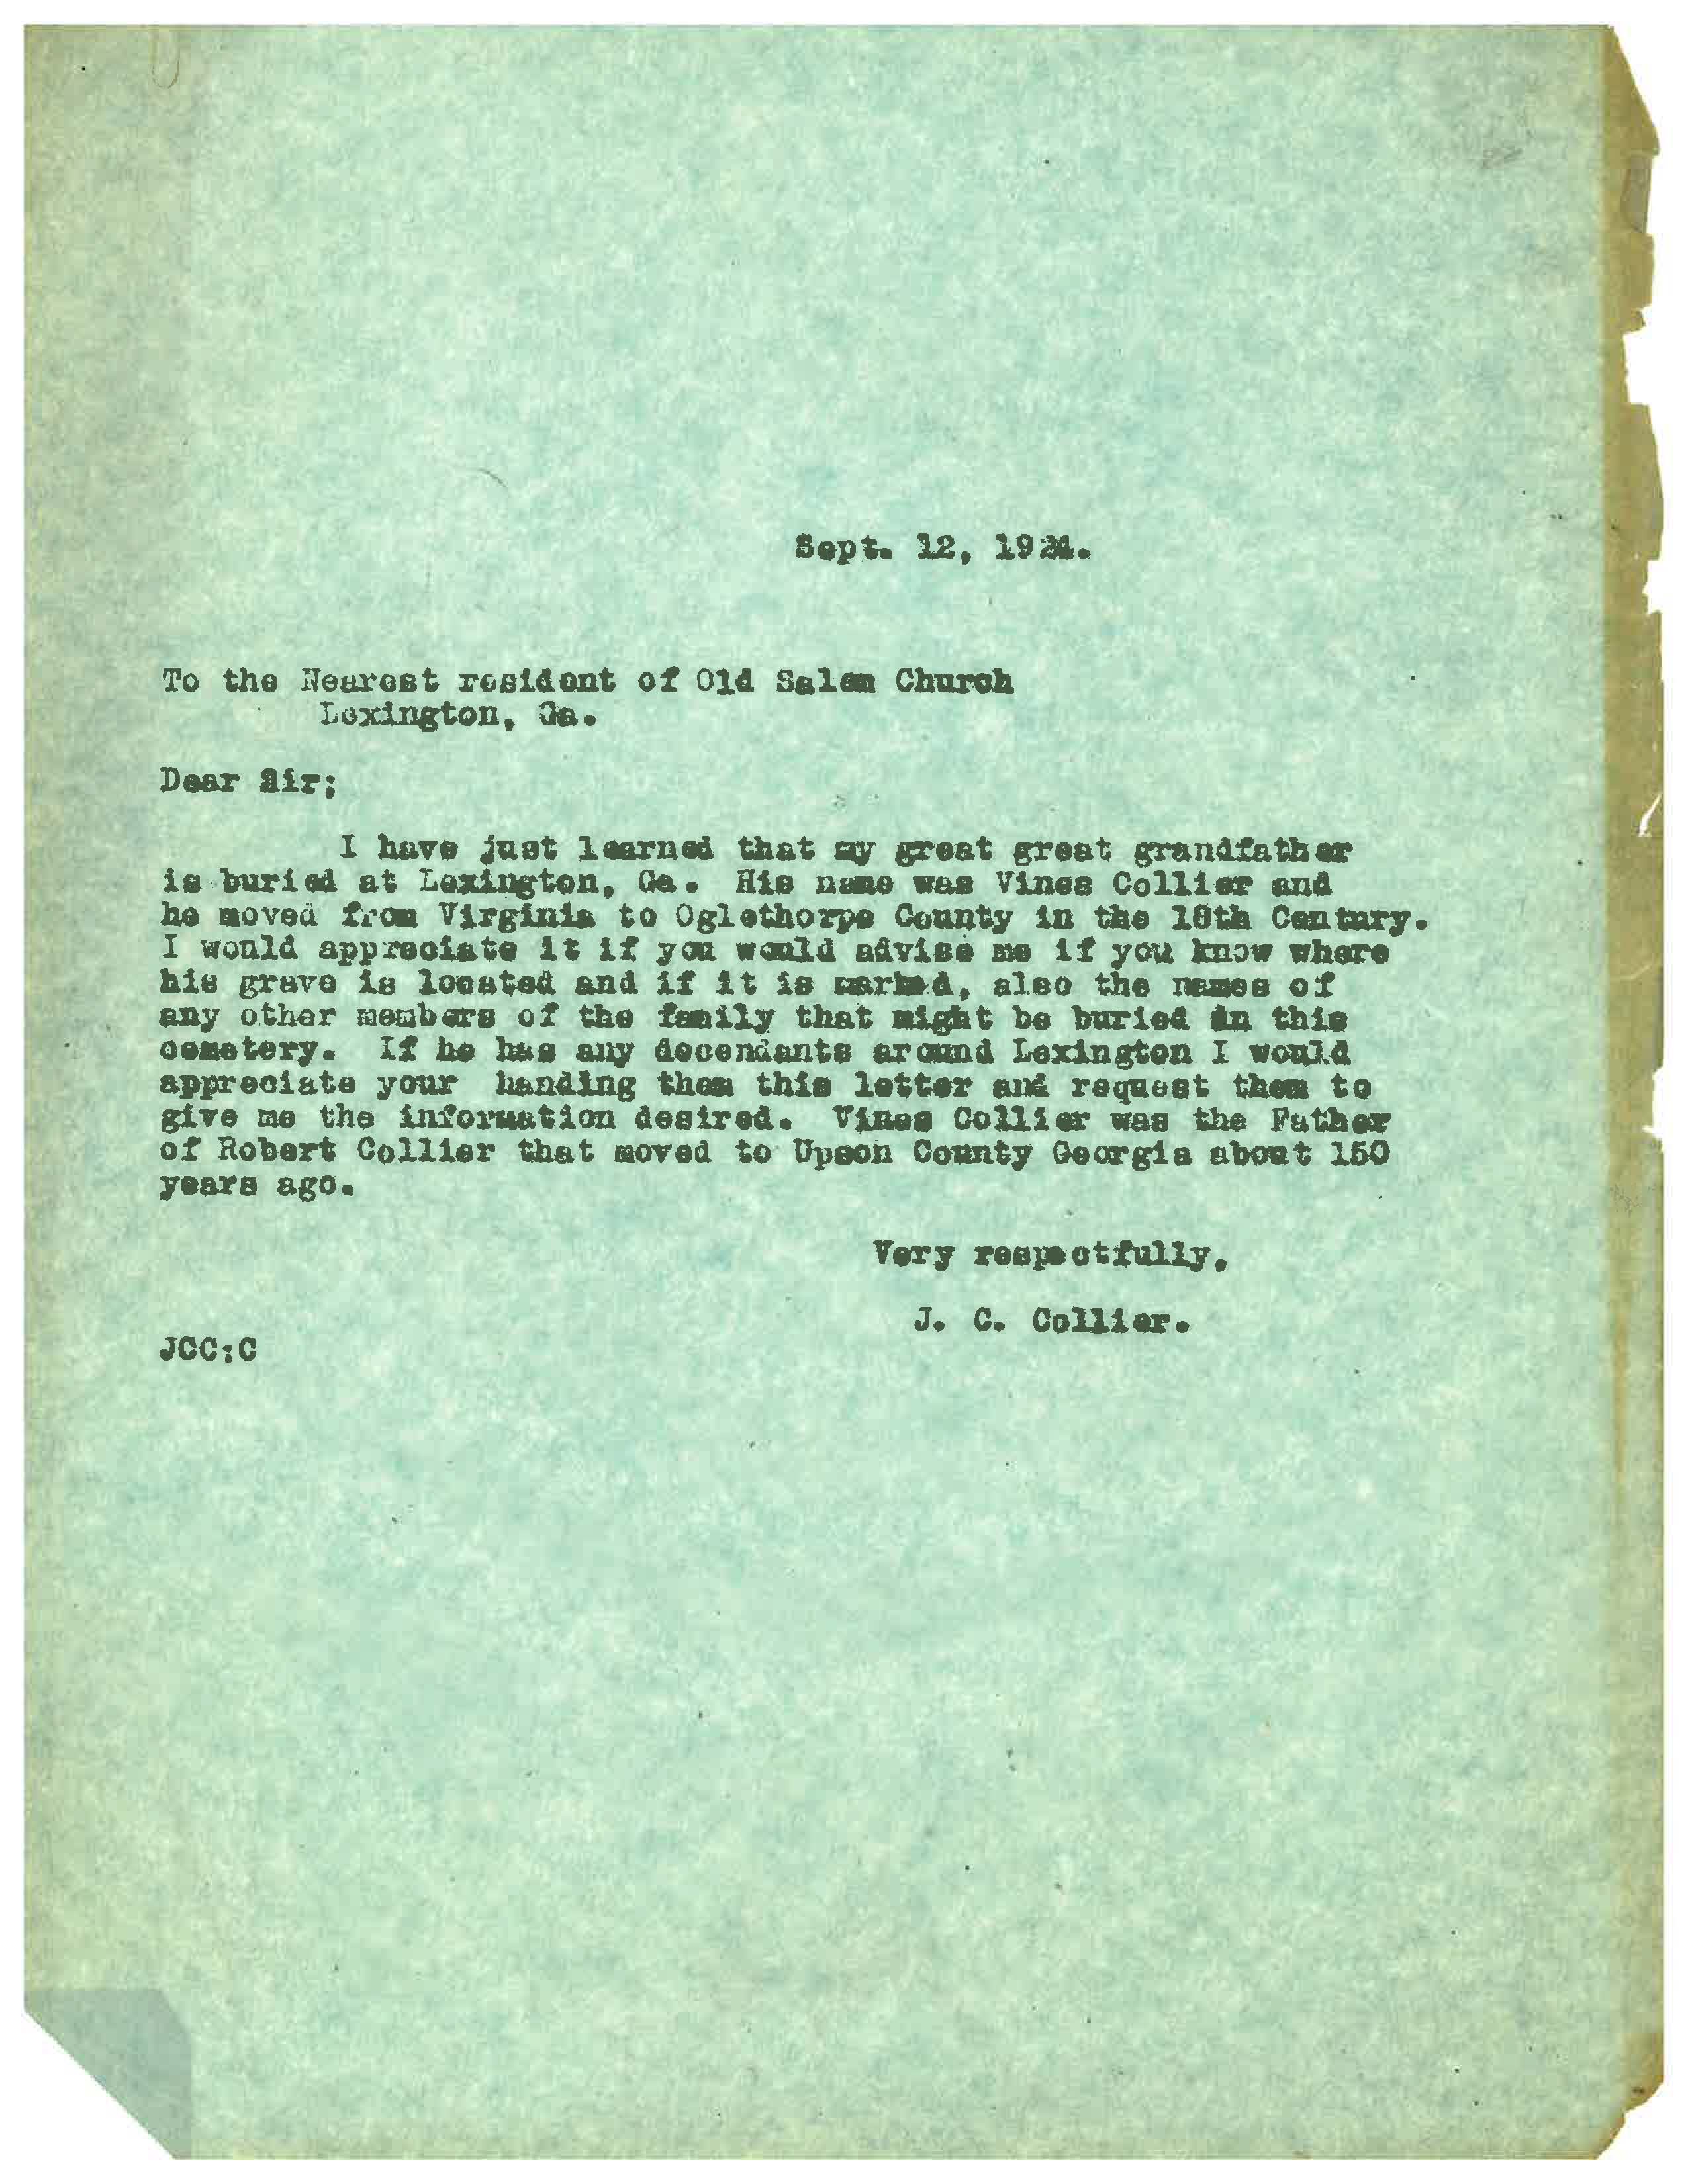 Example of Exploratory Letter Sent BY J. C. Collier